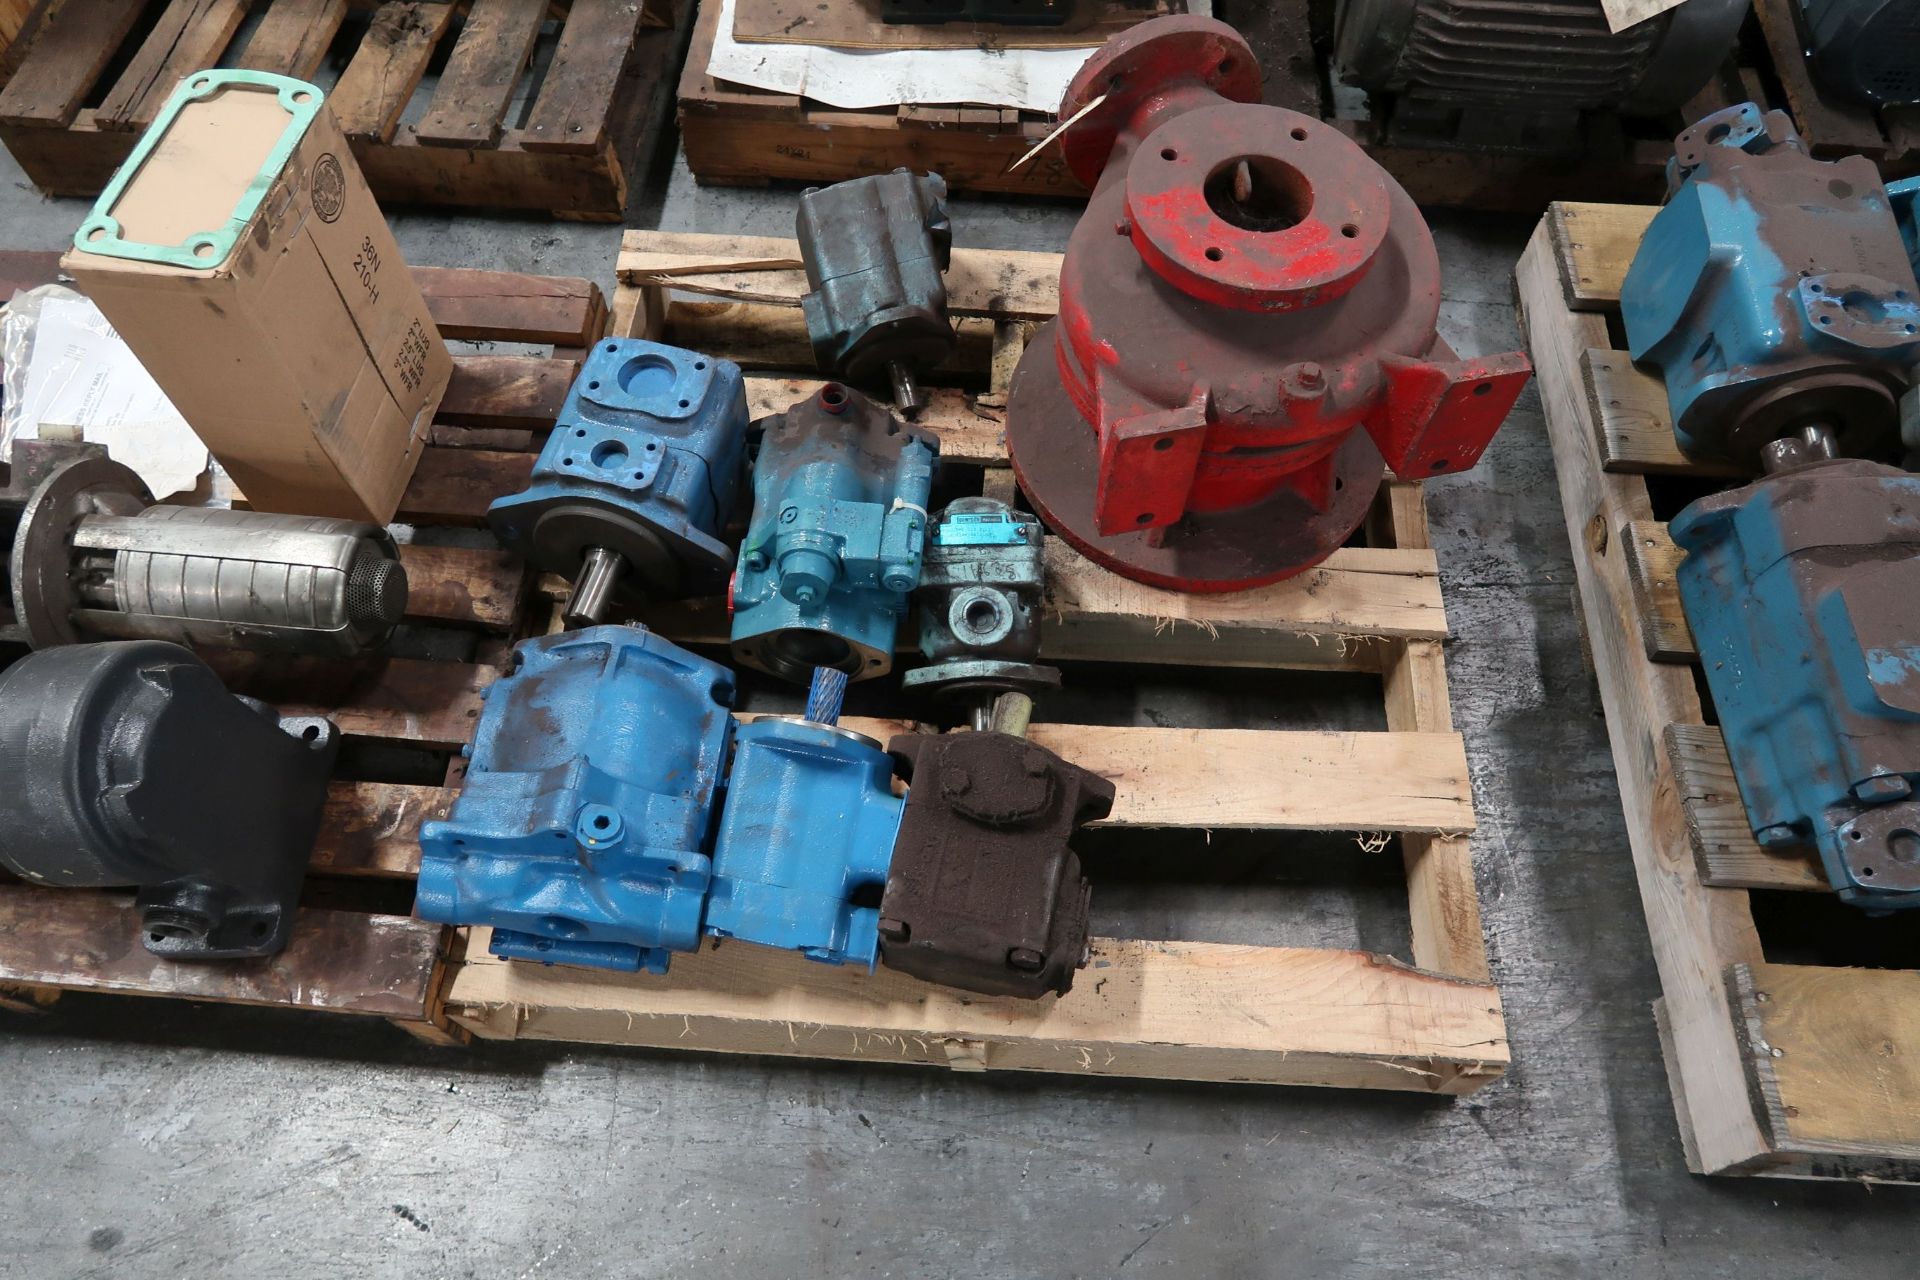 SKIDS PUMPS **LOADING PRICE DUE TO ERRA - $25.00** - Image 3 of 4